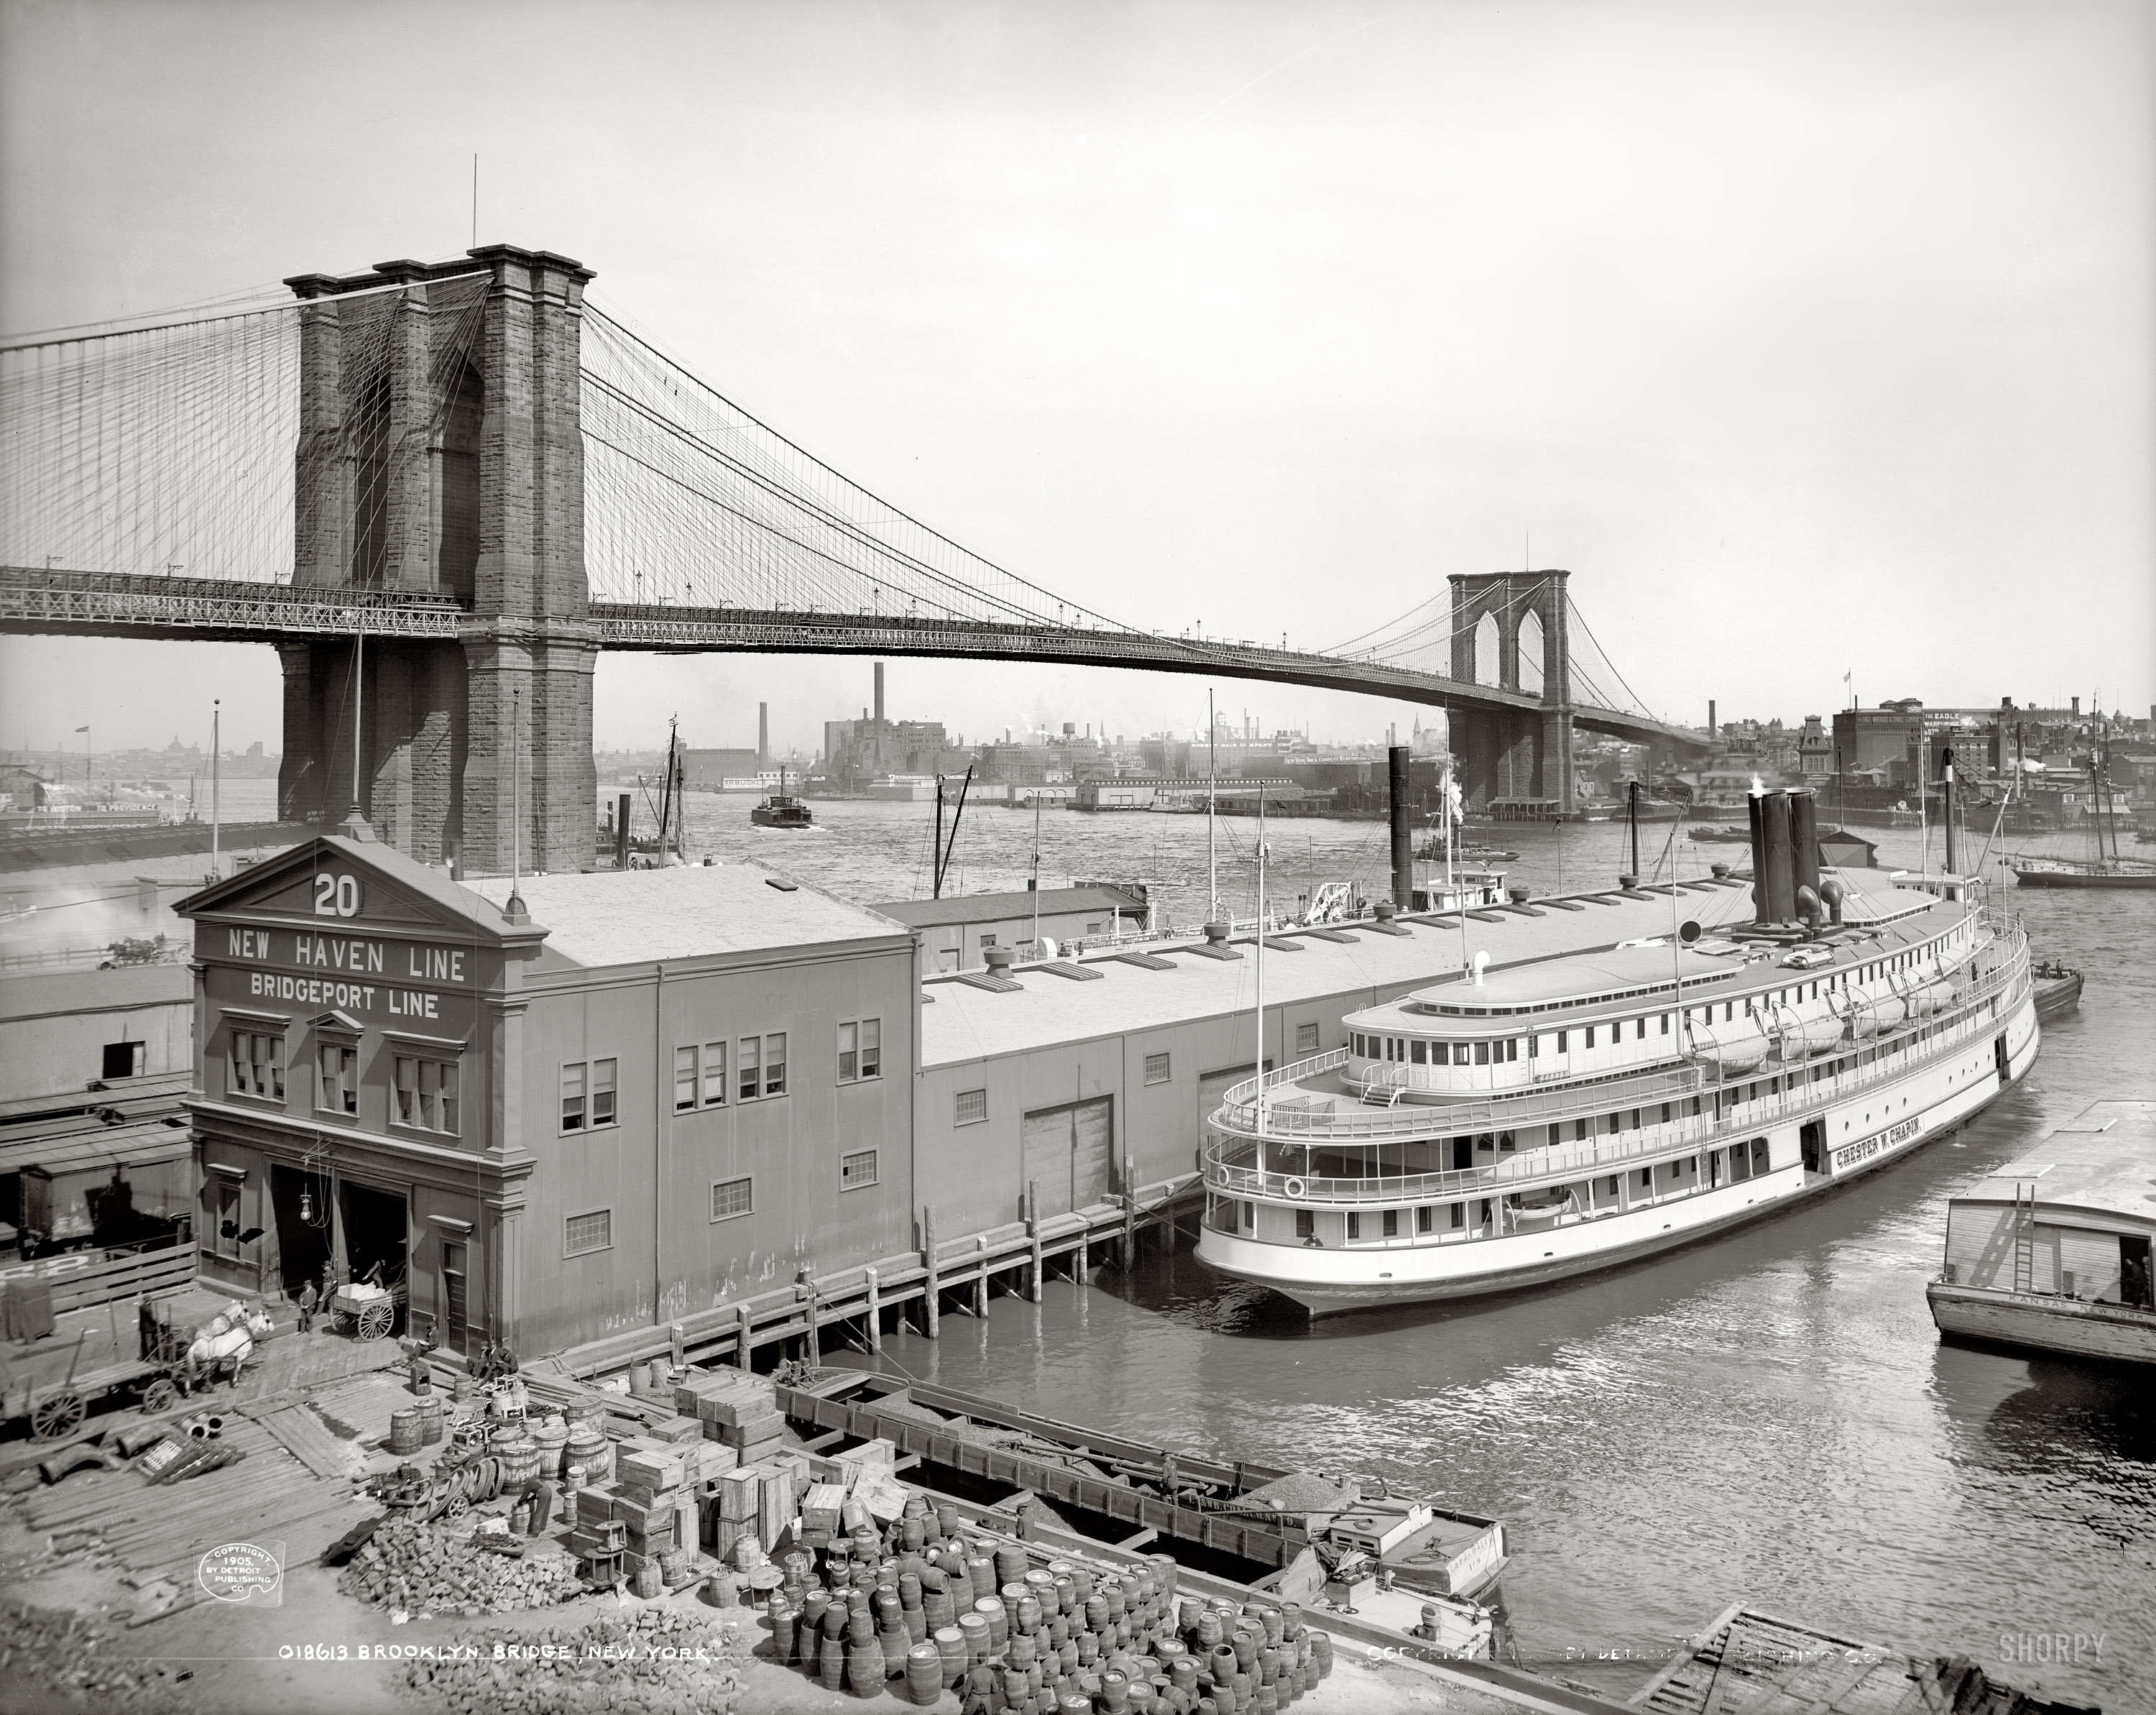 New York circa 1905. "Brooklyn Bridge over East River." 8x10 inch dry plate glass negative, Detroit Publishing Company. View full size.